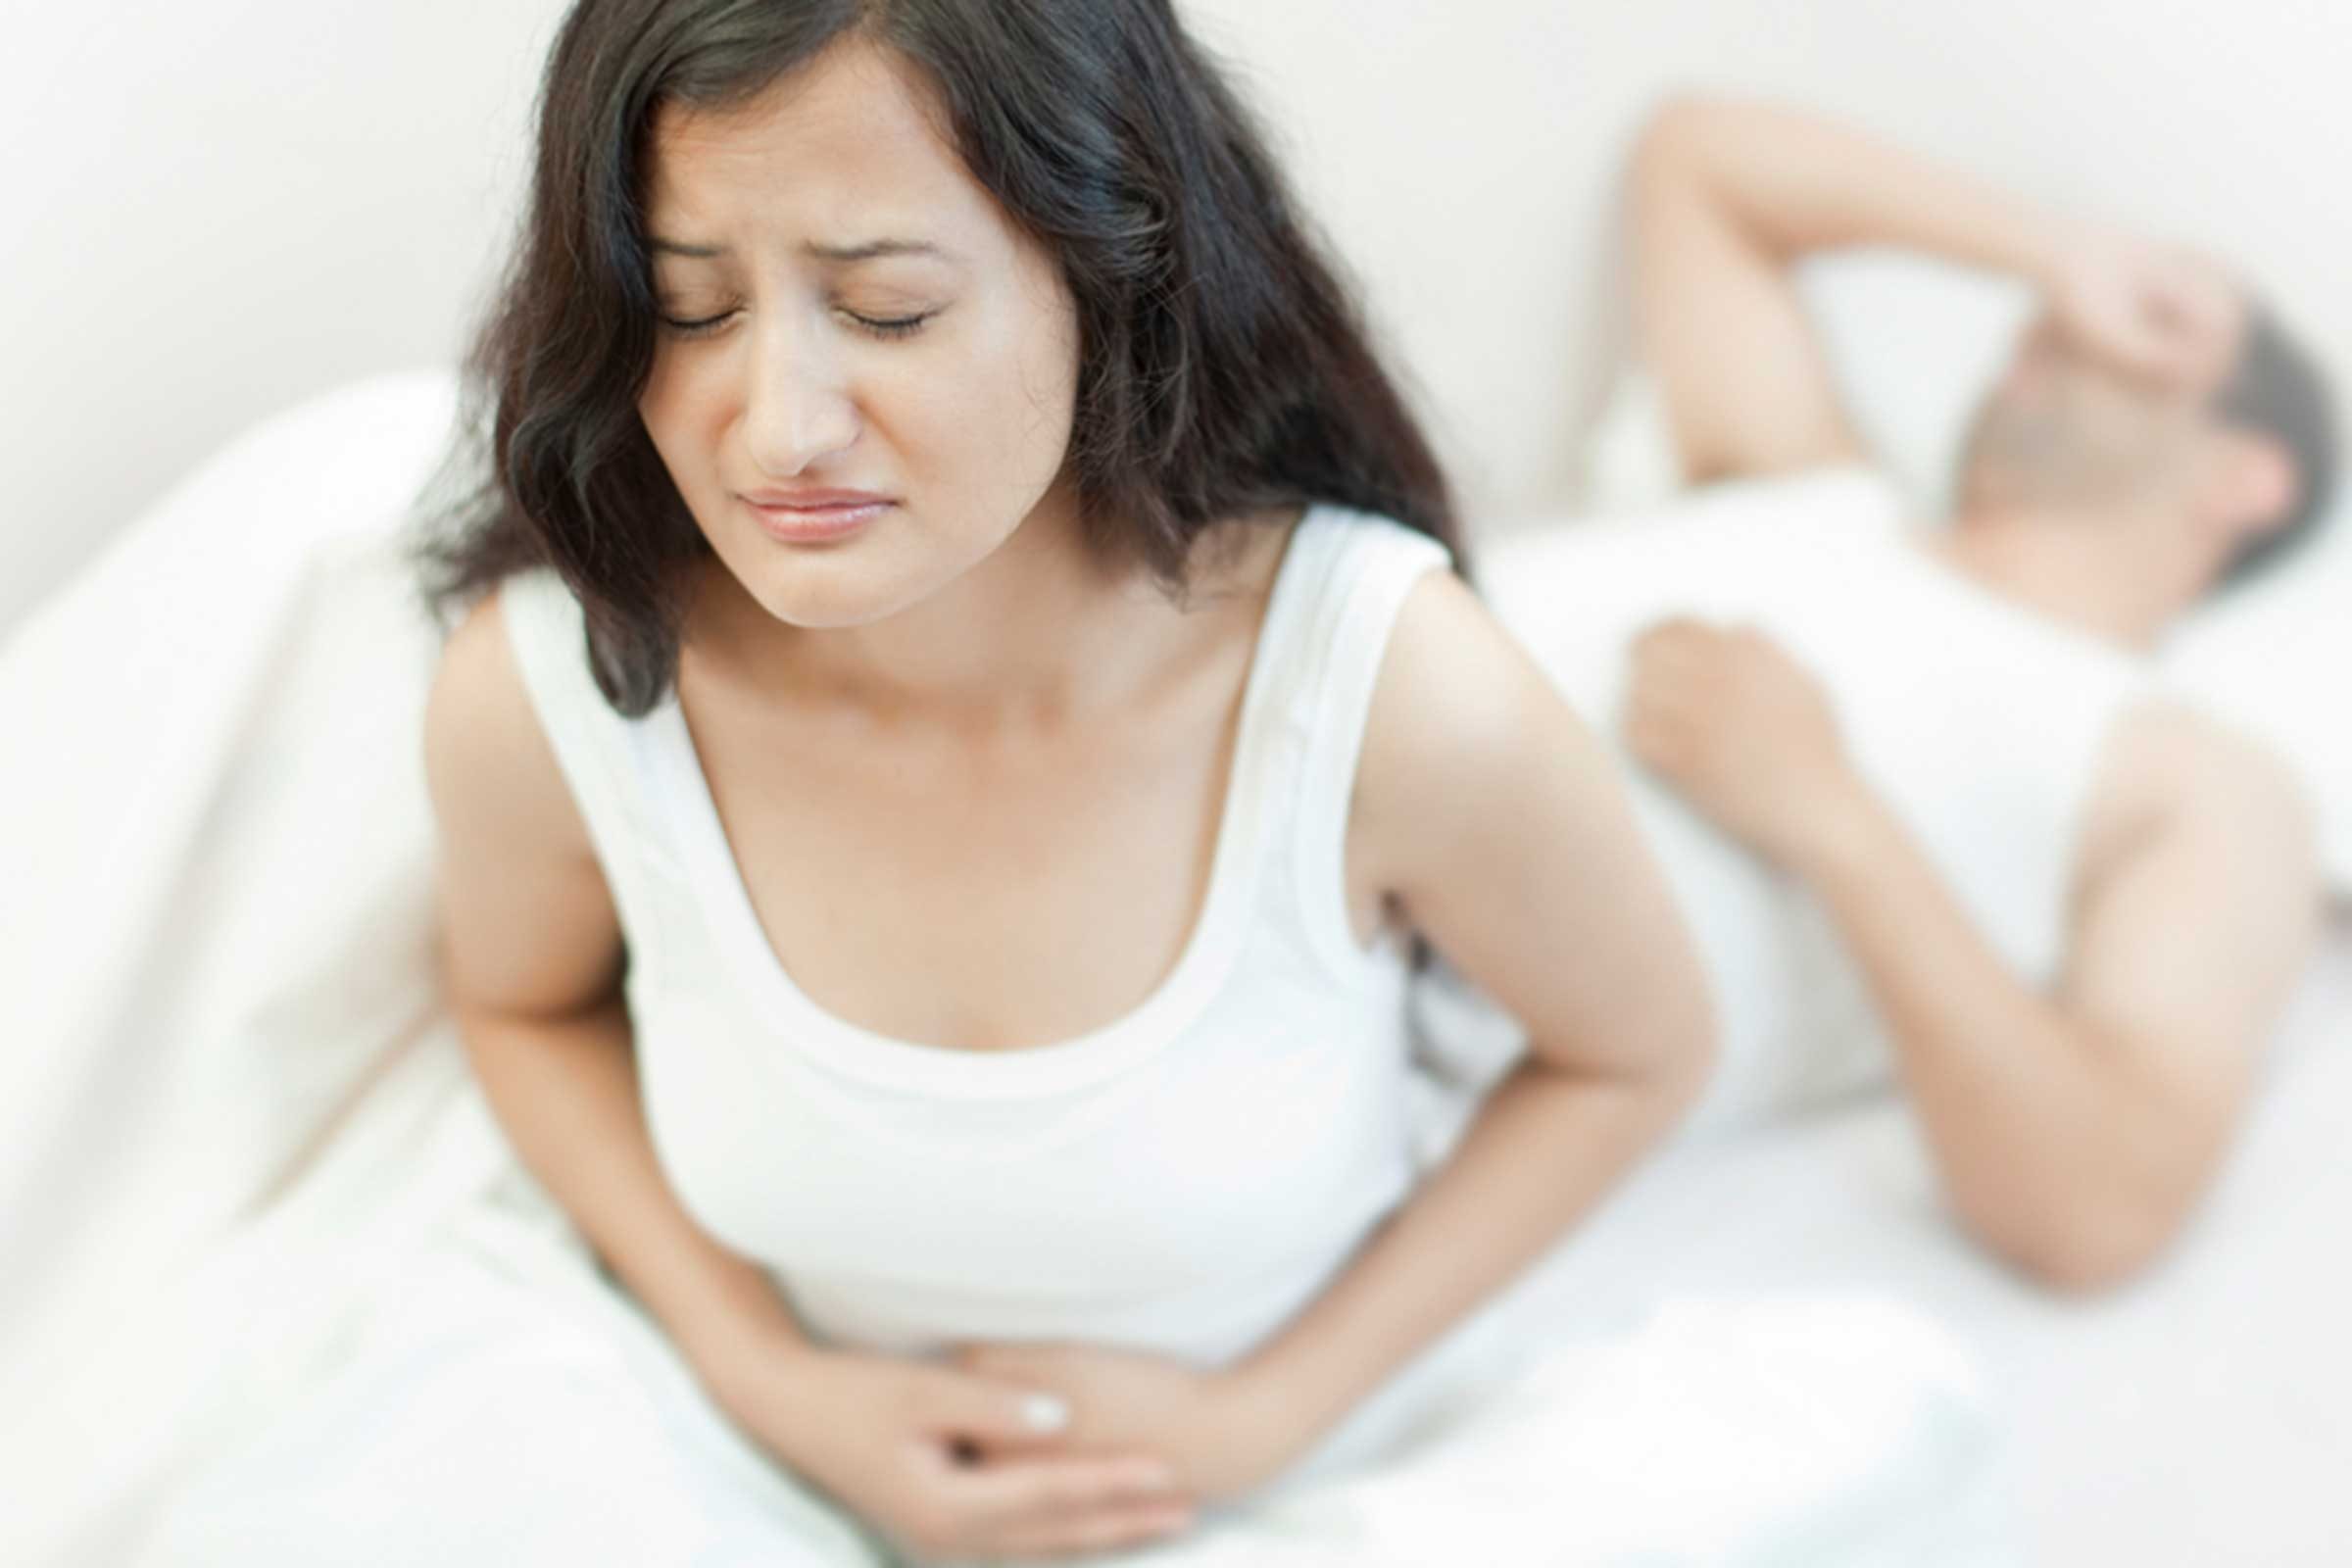 10 Signs of an Ulcer You Should Never Ignore